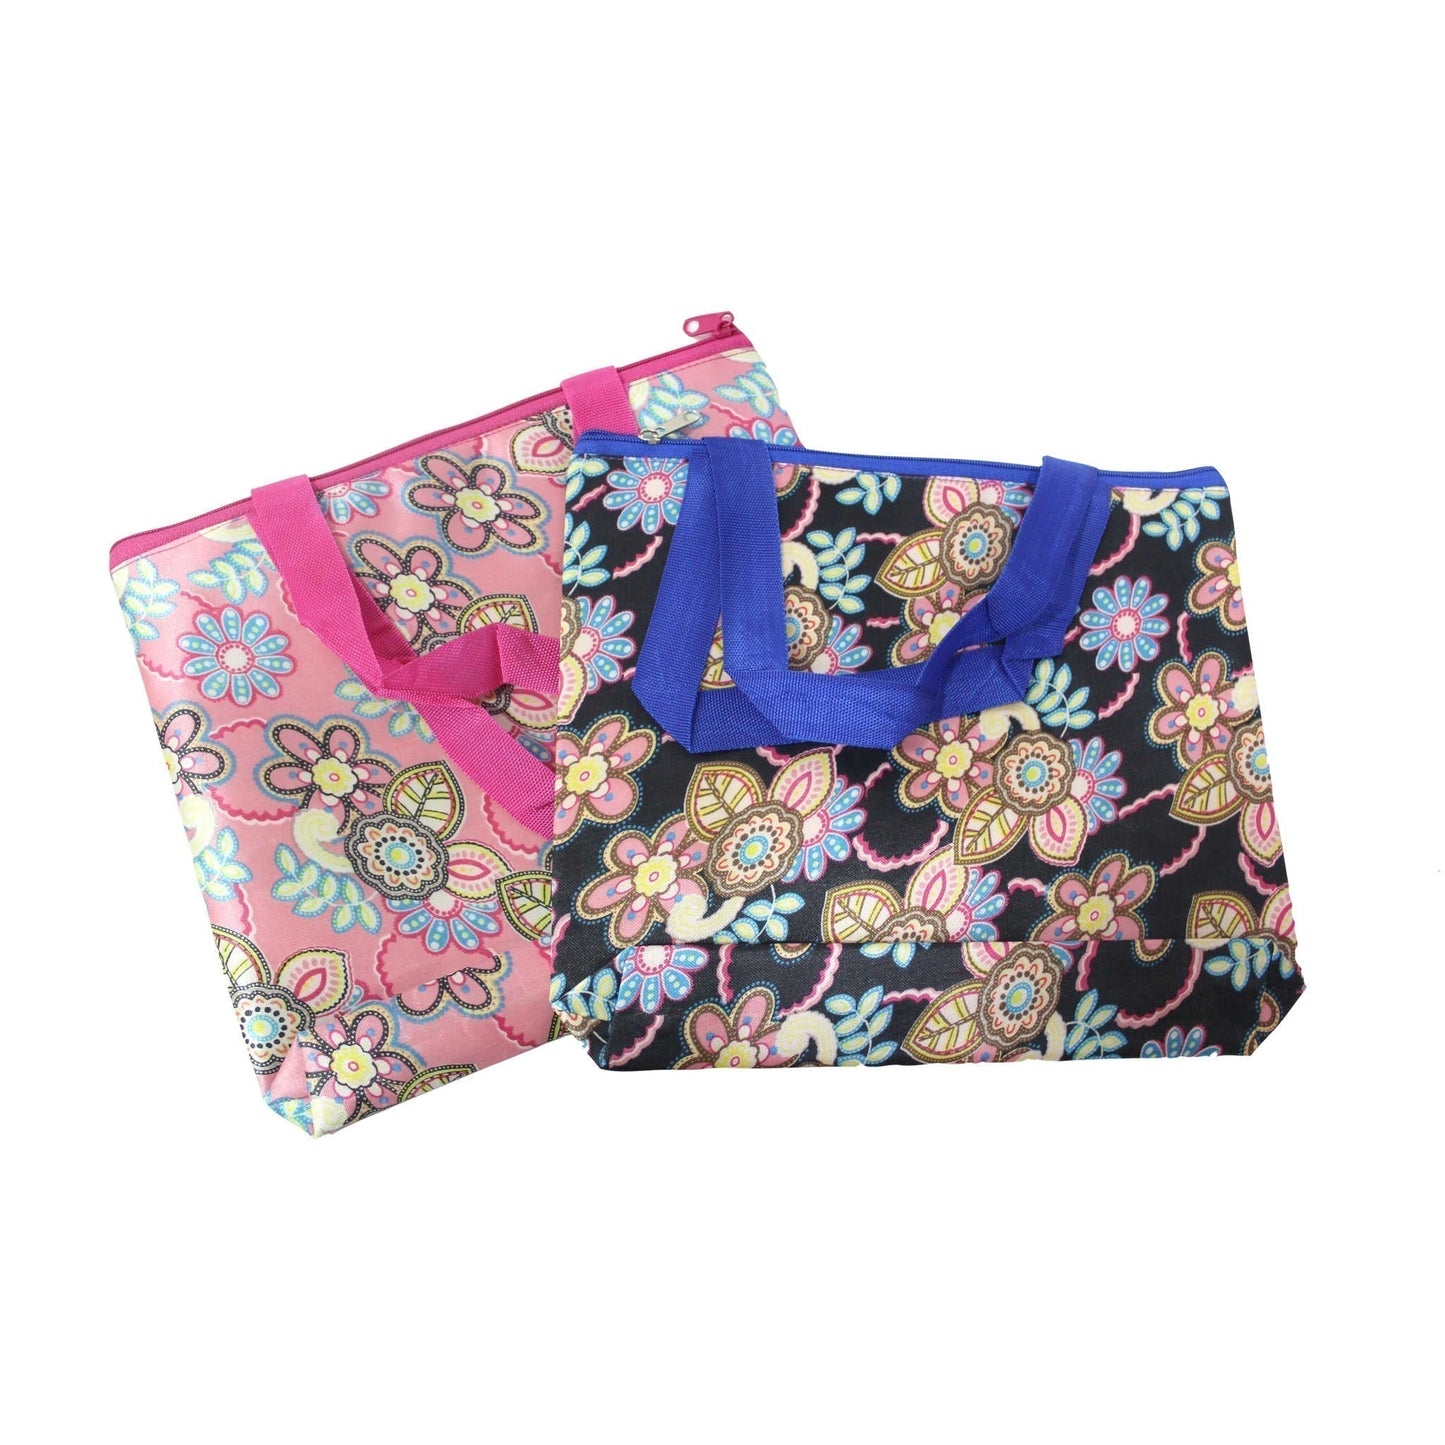 Indian Petals Buy any 6 Imported Durable Canvas Printed multi purpose utility Bag with handles, Get FLAT 15% OFF